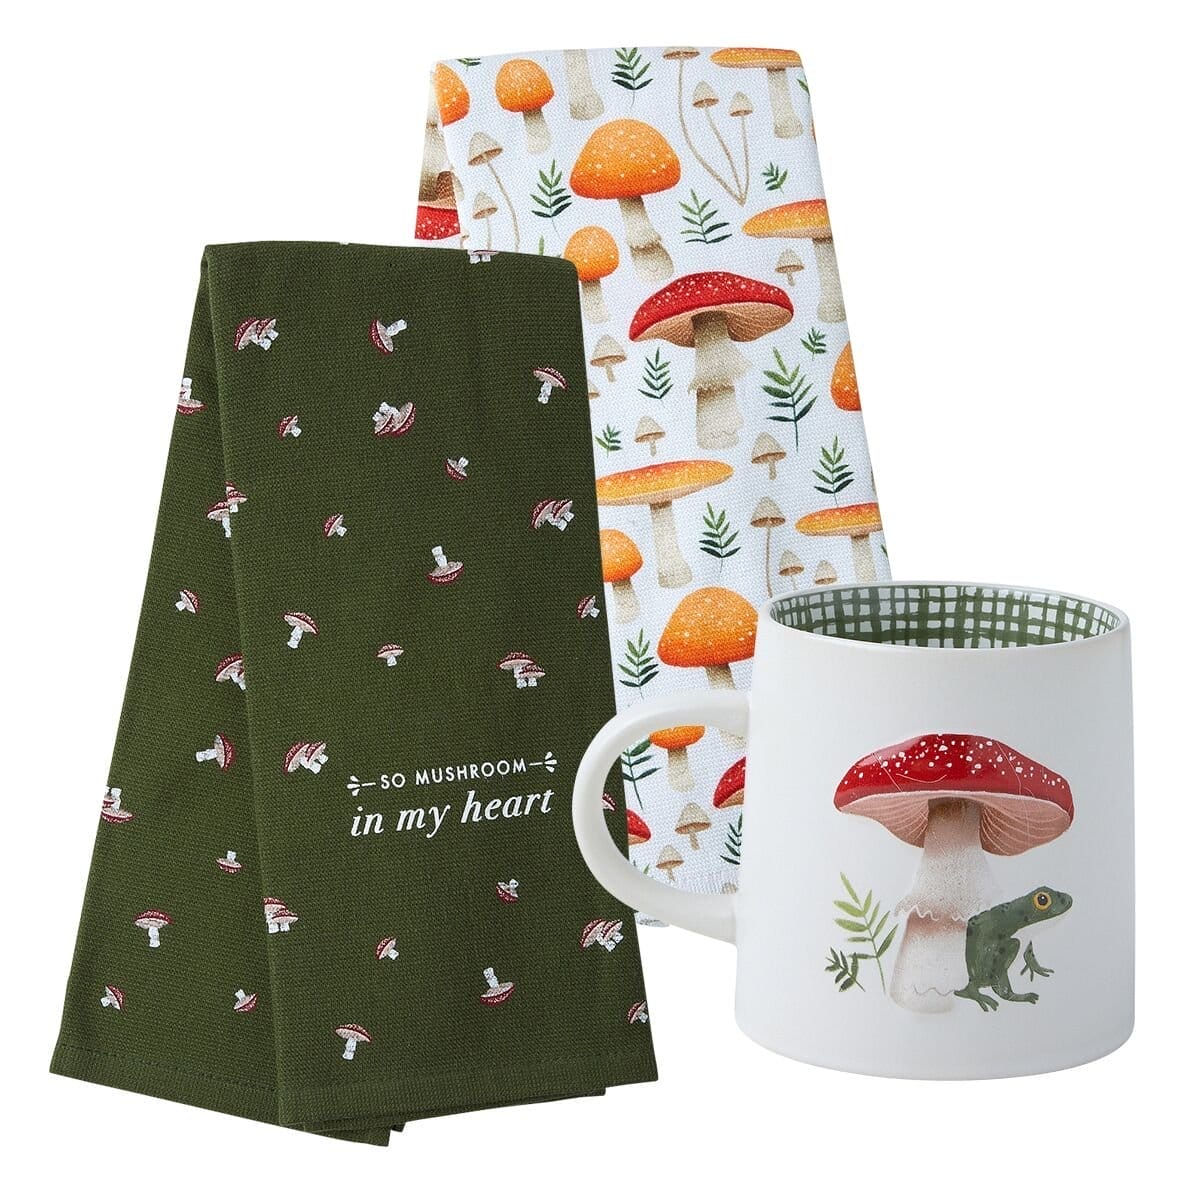 Place and Time Spring Mugs and Towels